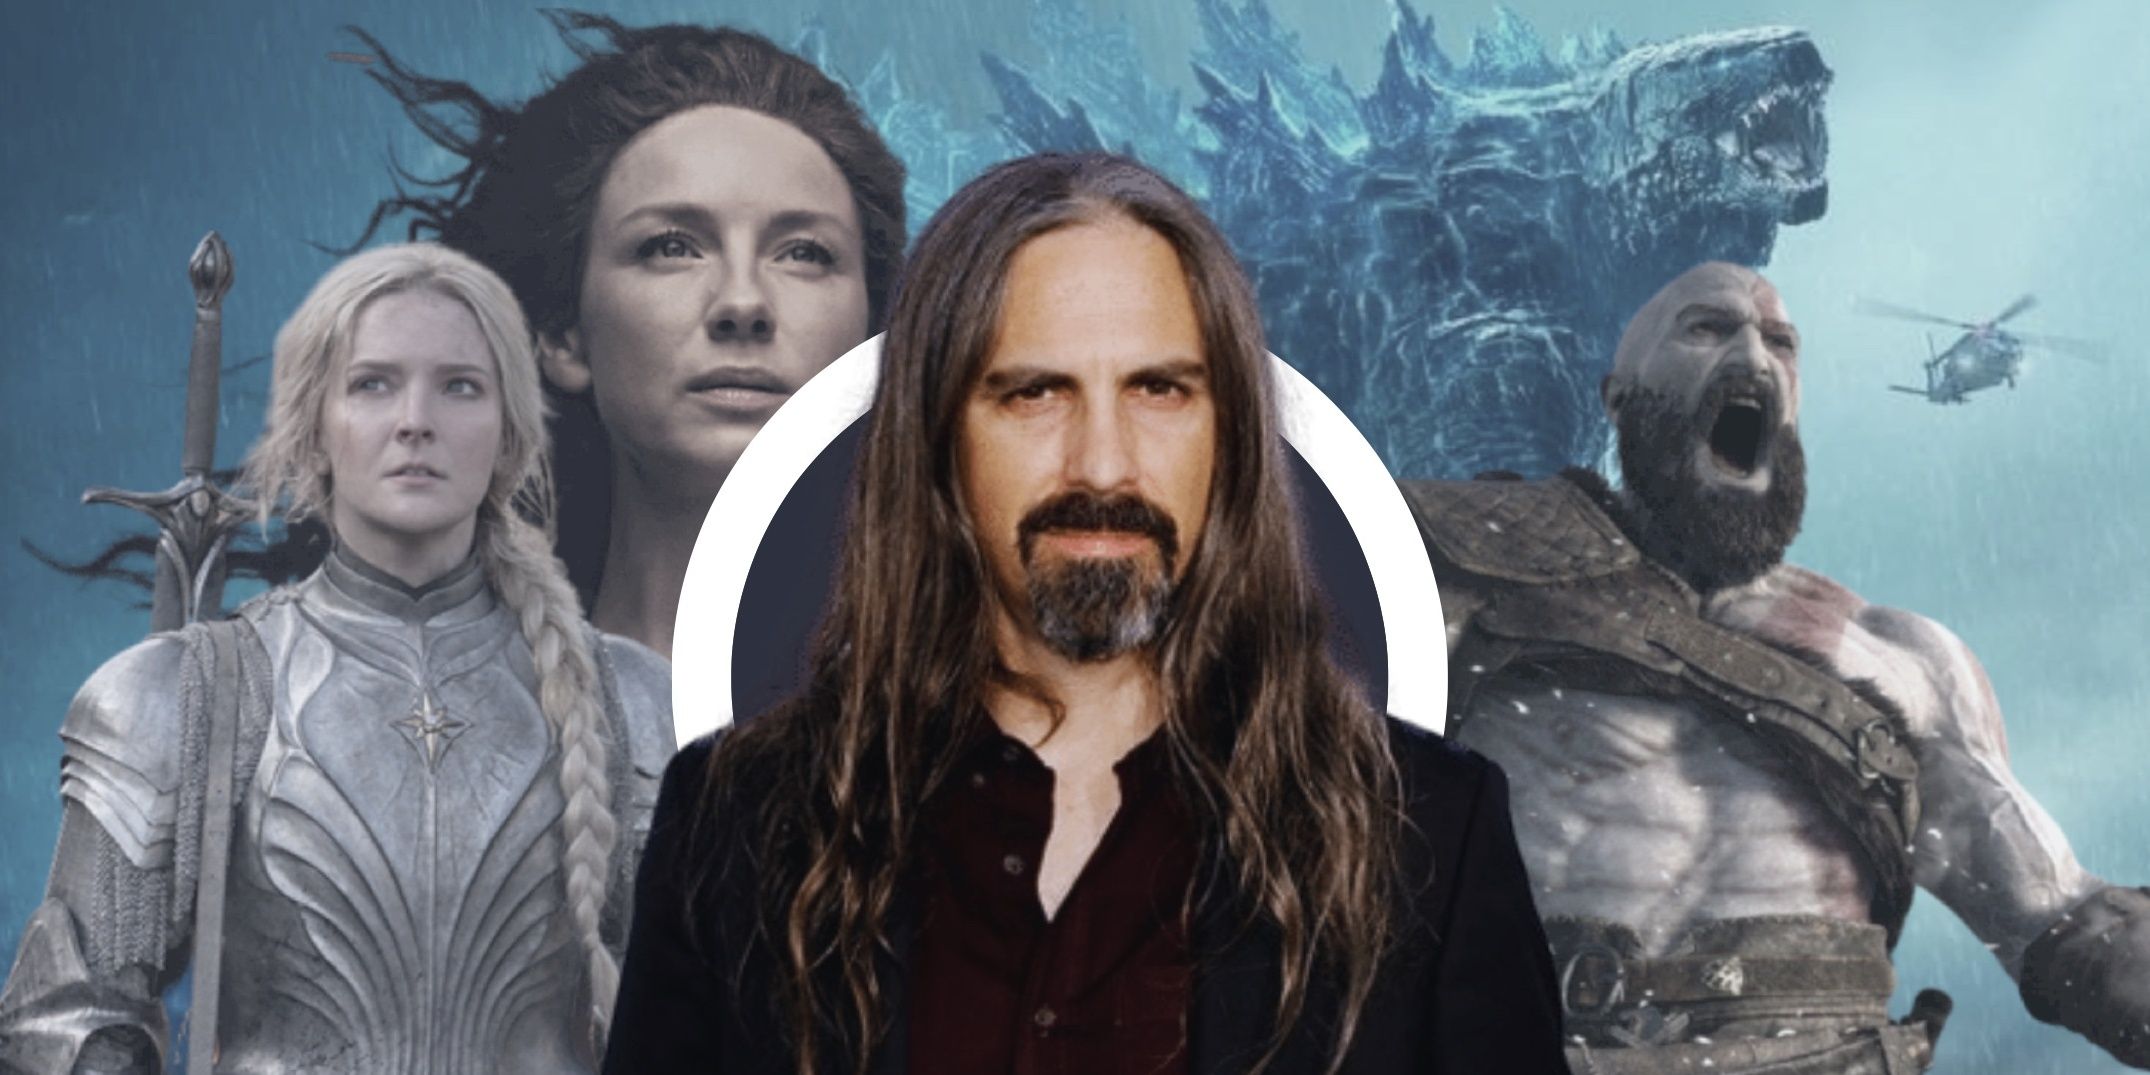 Bear McCreary – The Lord Of The Rings: The Rings Of Power (Season